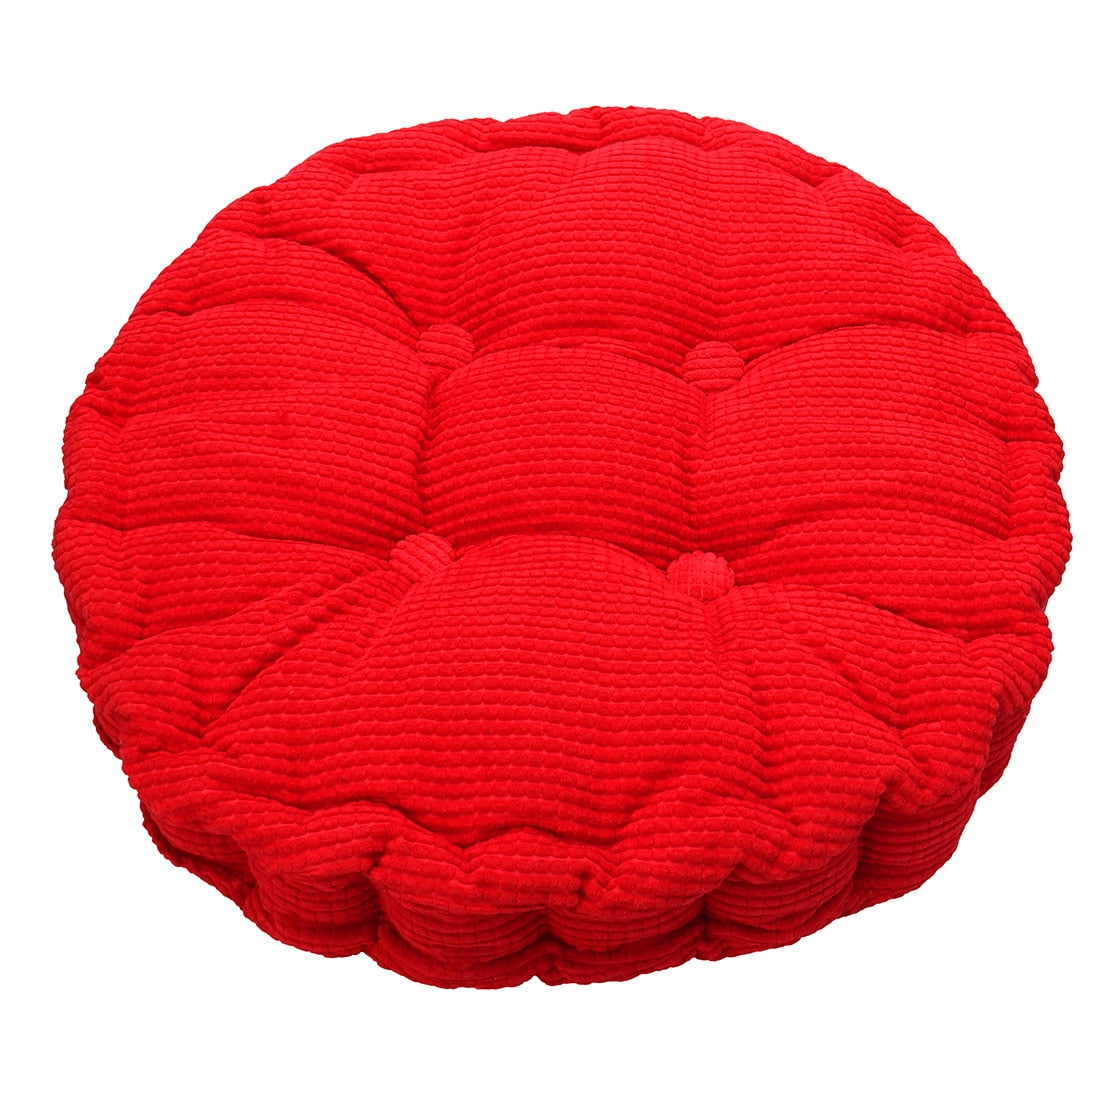 Details about   Seat Cushion Pad Cushion Thicken 16" Round Square Floor Window Cotton Chair Pad